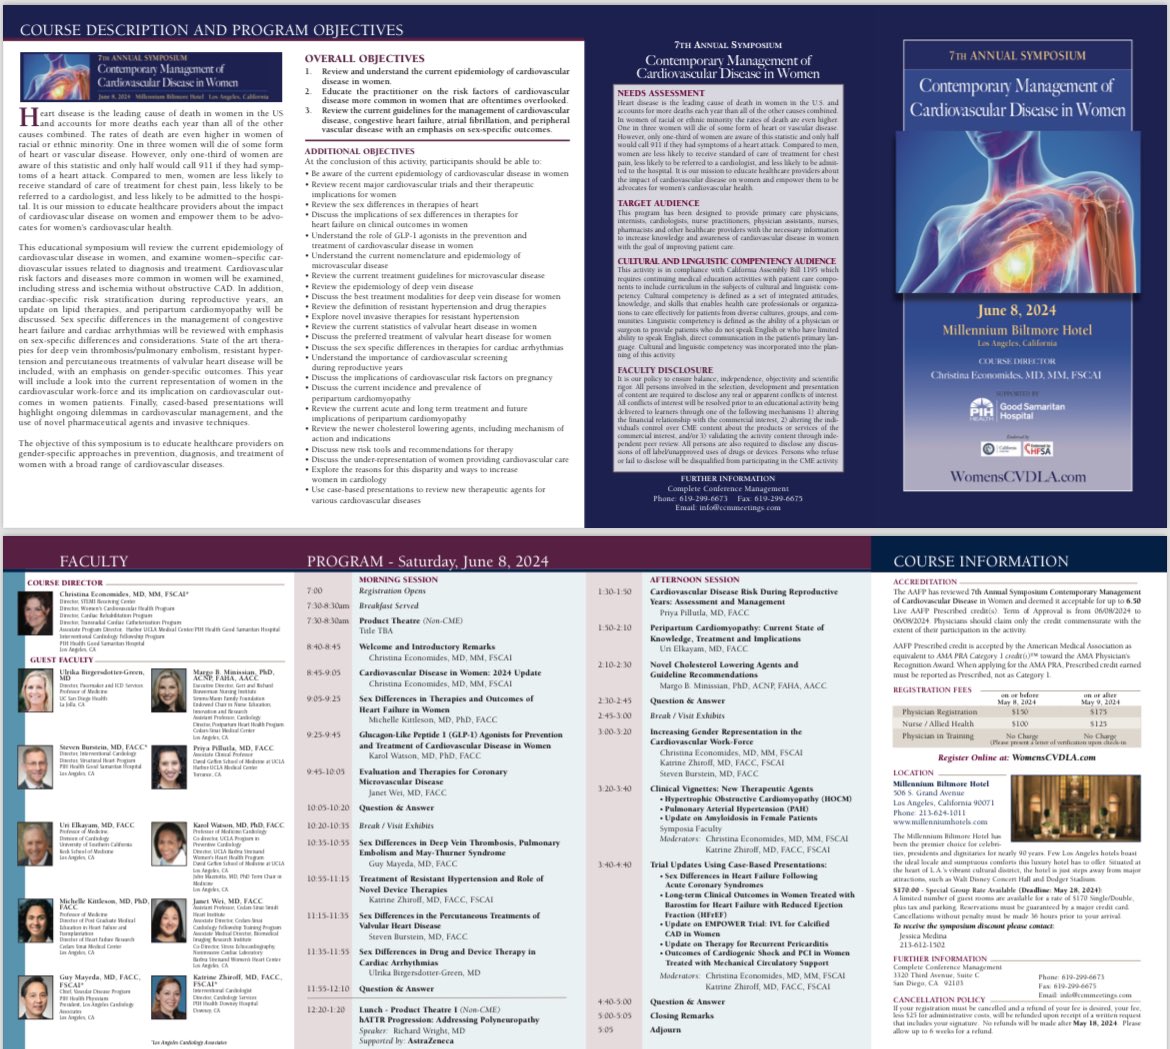 Join us for a fantastic lineup of speakers at the 7TH ANNUAL Contemporary Management of Cardiovascular Disease in Women Symposium June 8 in Los Angeles! @DrMarthaGulati @AleeshaShaikMD @NehaChandraMD @datsunian